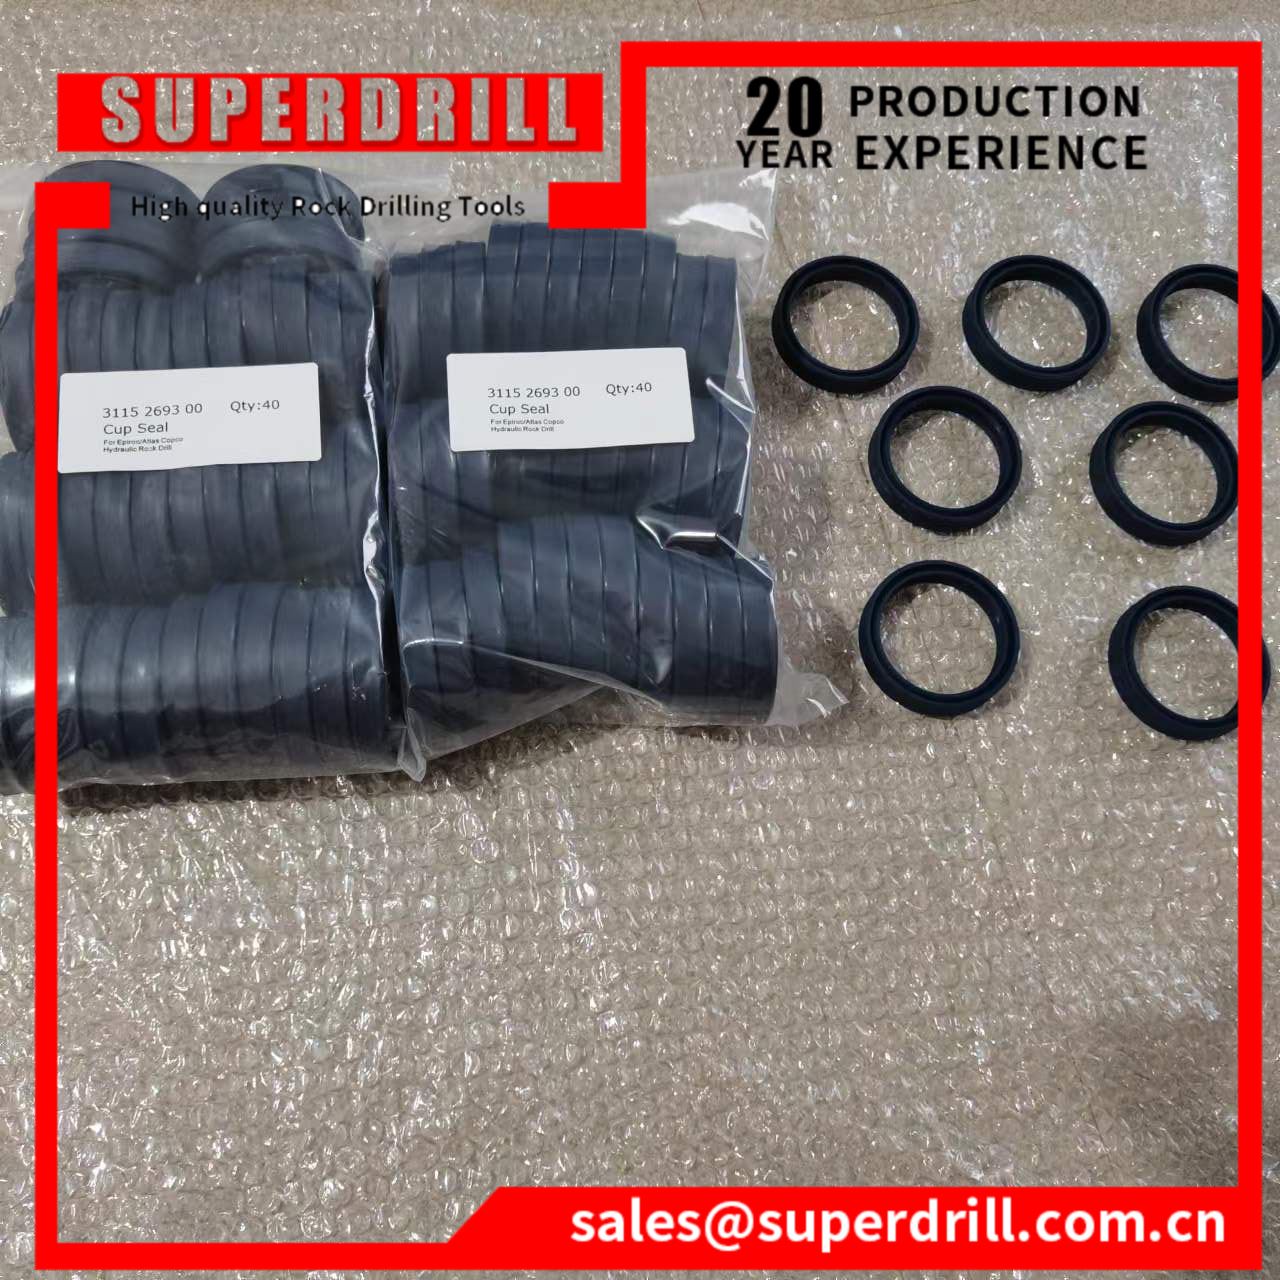 3115269300/cup Seal/drilling Rig Accessories